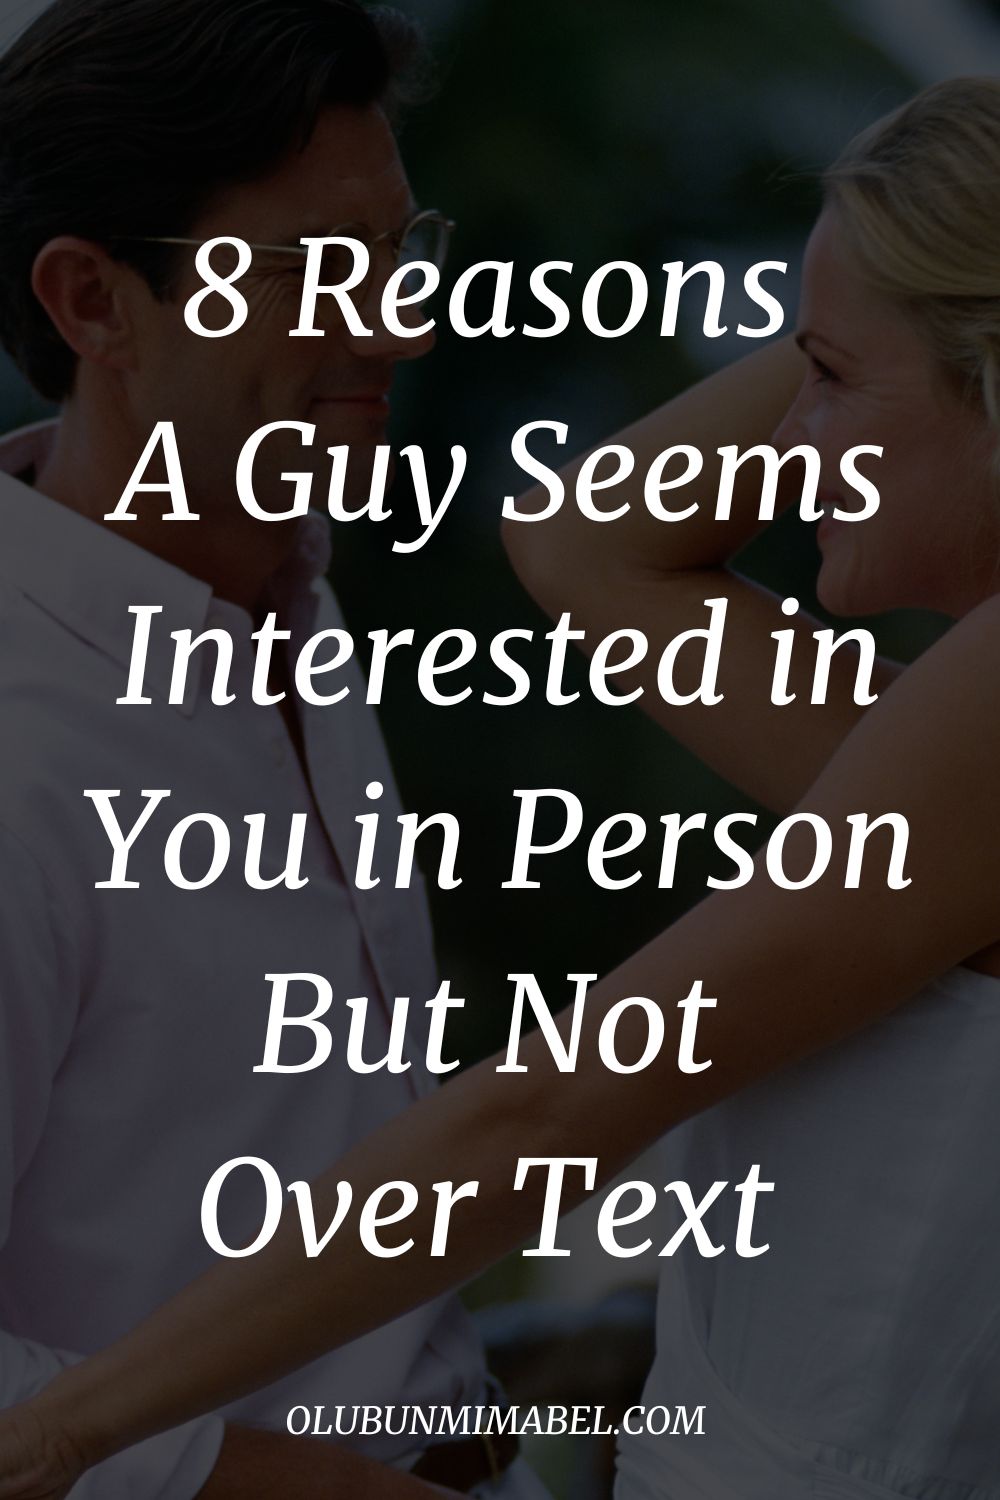 8 Reasons He Seems Interested In Person But Not Over Text - Olubunmi Mabel